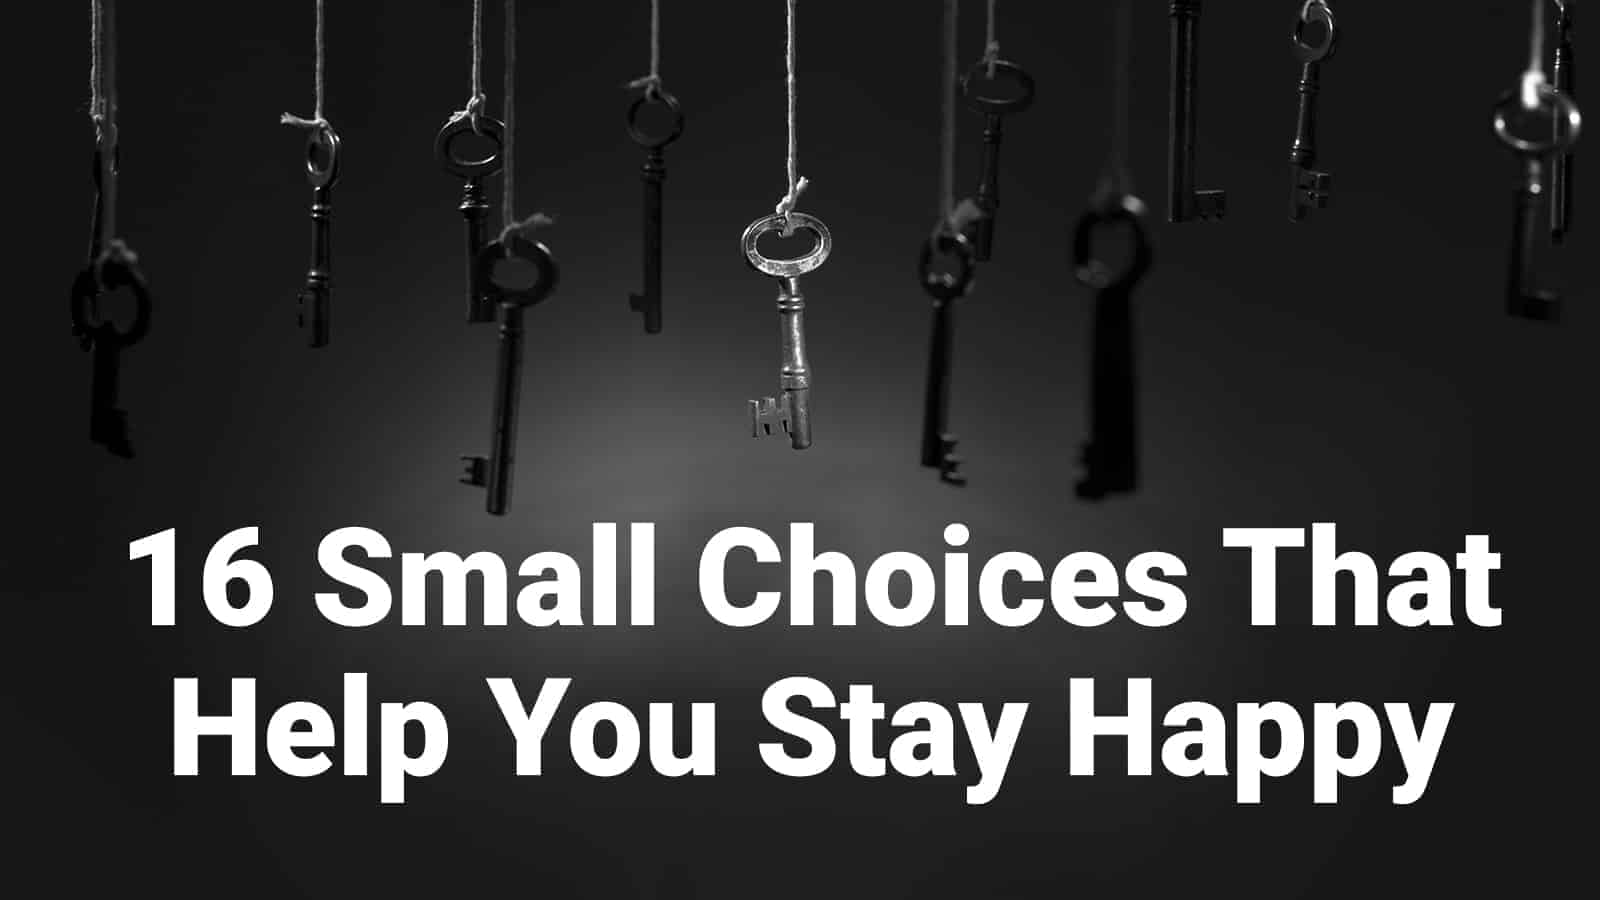 16 Small Choices That Help You Stay Happy